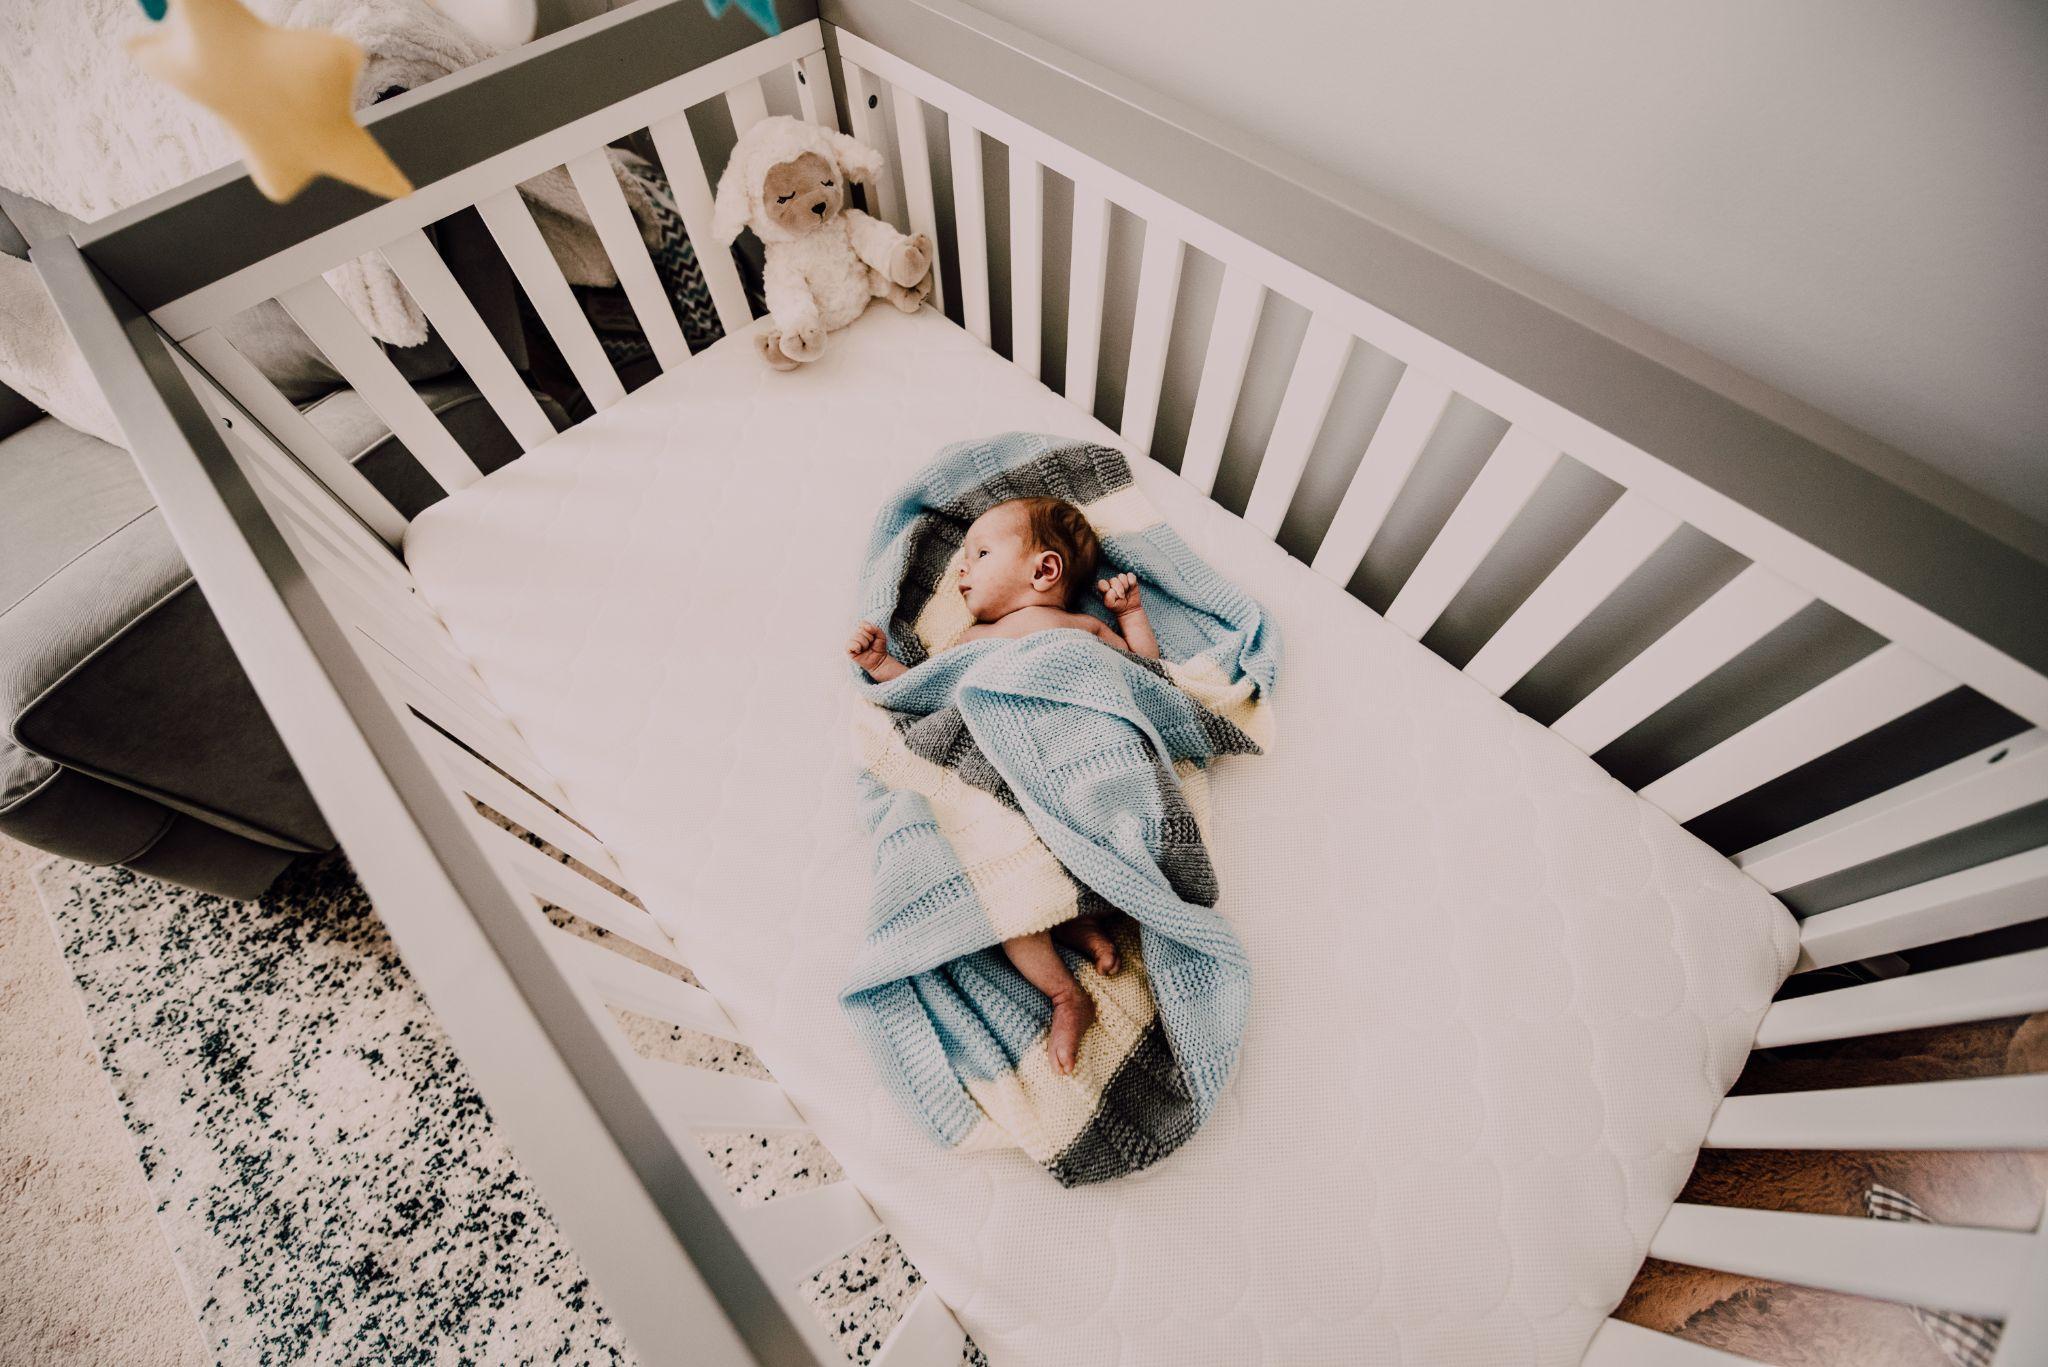 Photo of a baby resting in a baby crib - how to make baby more comfortable in crib - Baby Journey